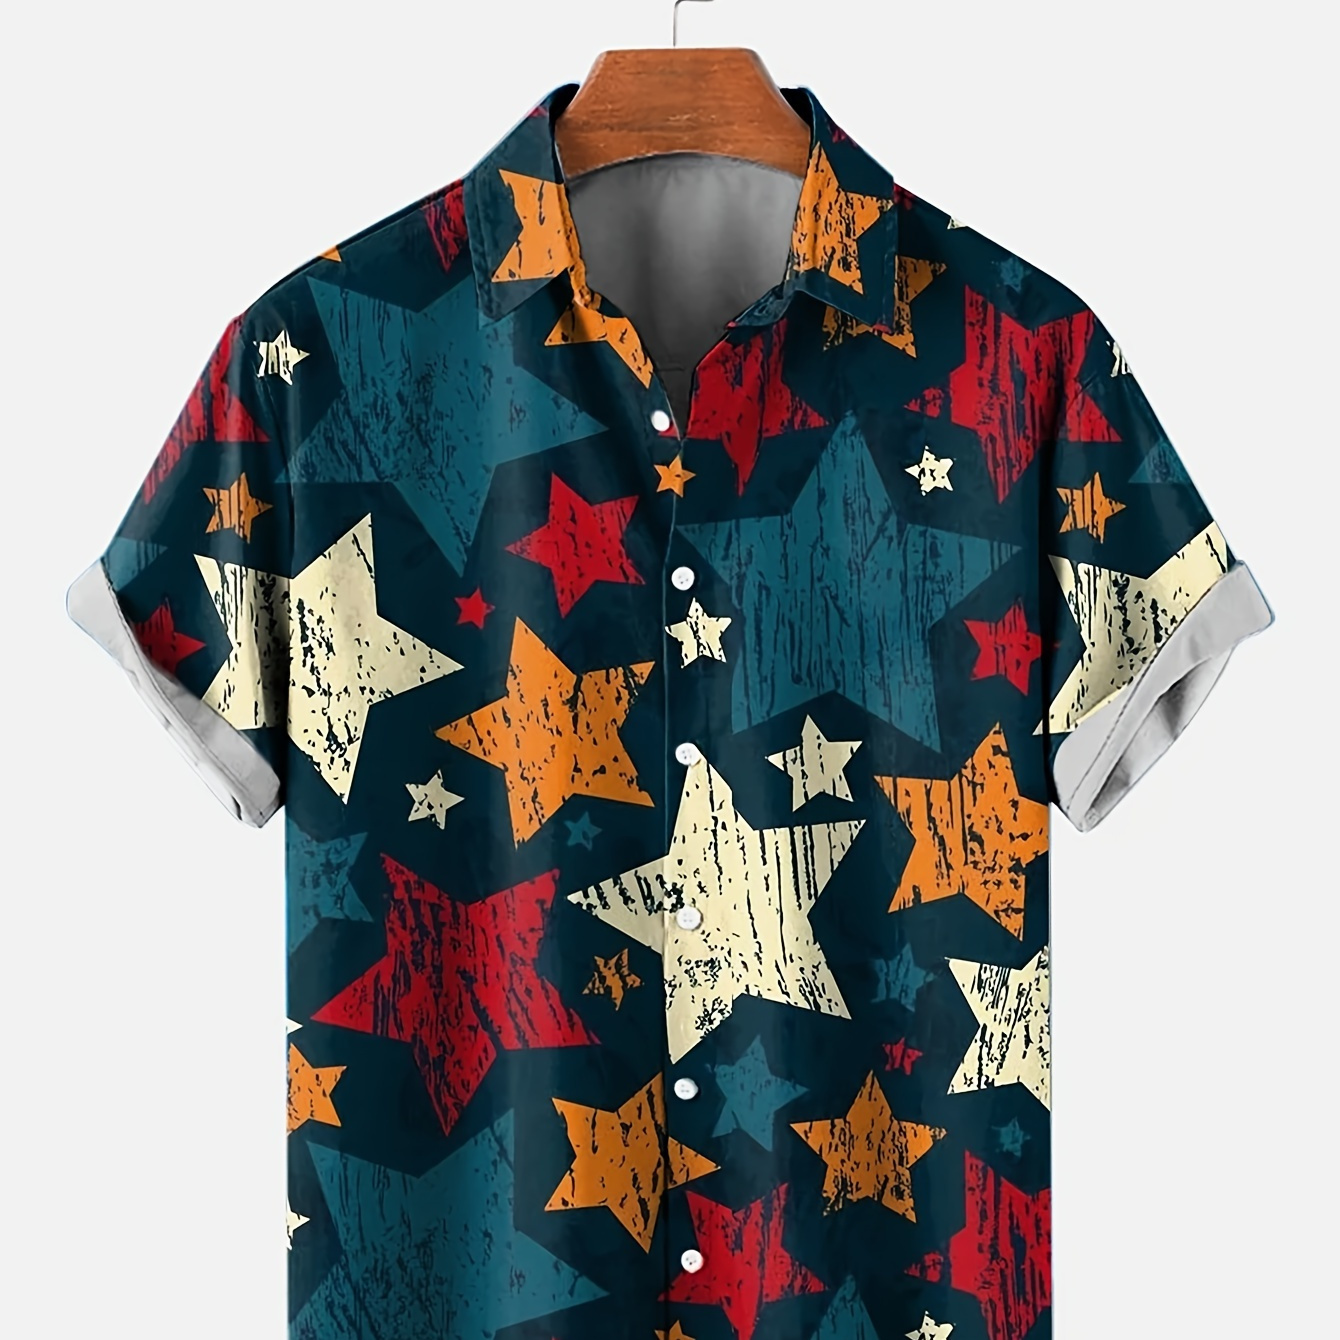 

Five-pointed Stars Graphic Design Men's Fashion Short Sleeve Button Down Lapel Hawaiian Style Shirt For Summer Resort Vacation